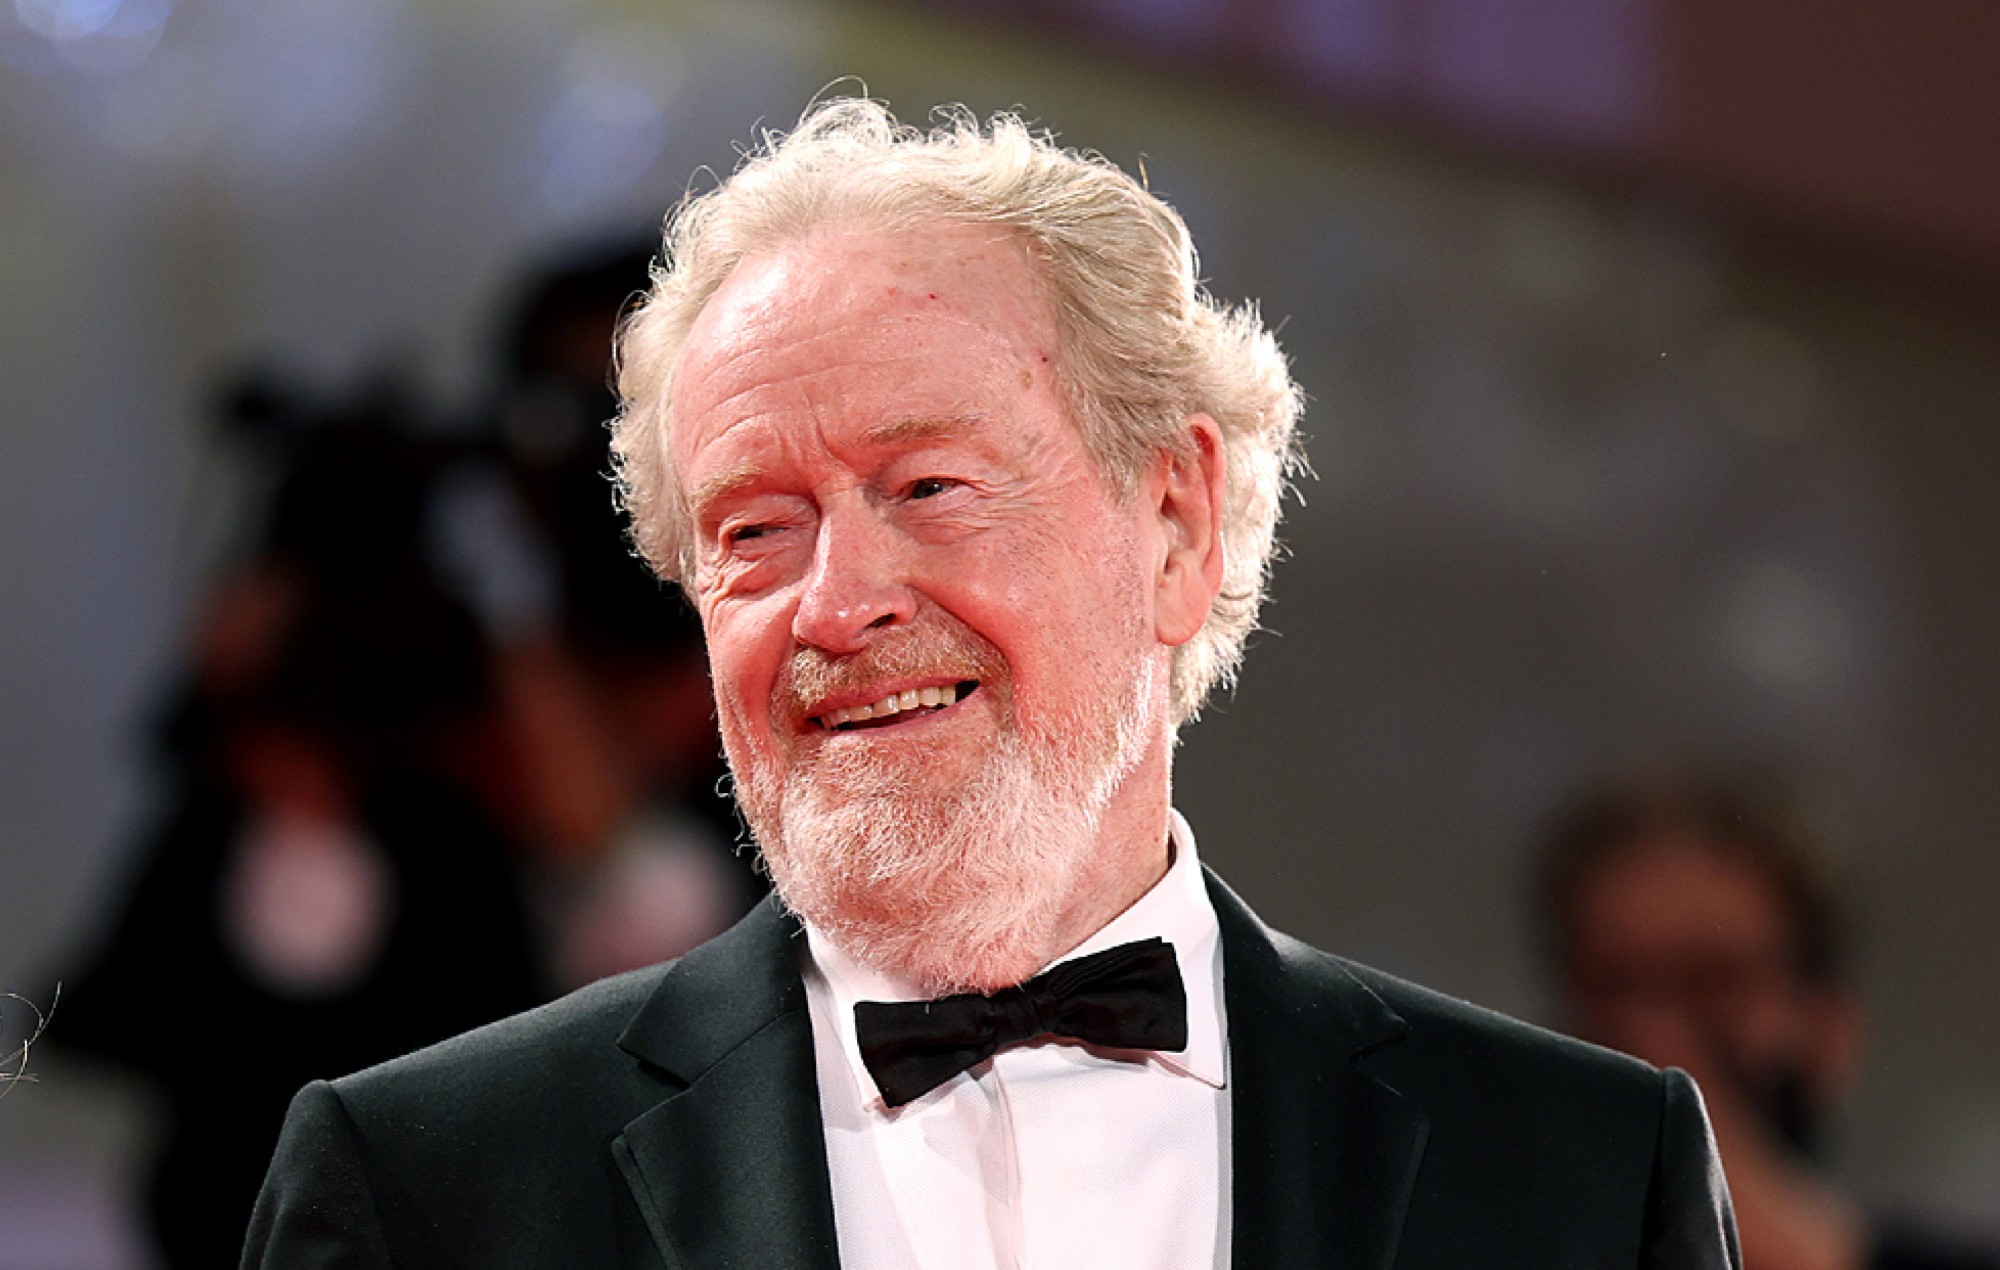 Ridley Scott tells ‘Napoleon’ critics to “get a life” after pointing out historical inaccuracies